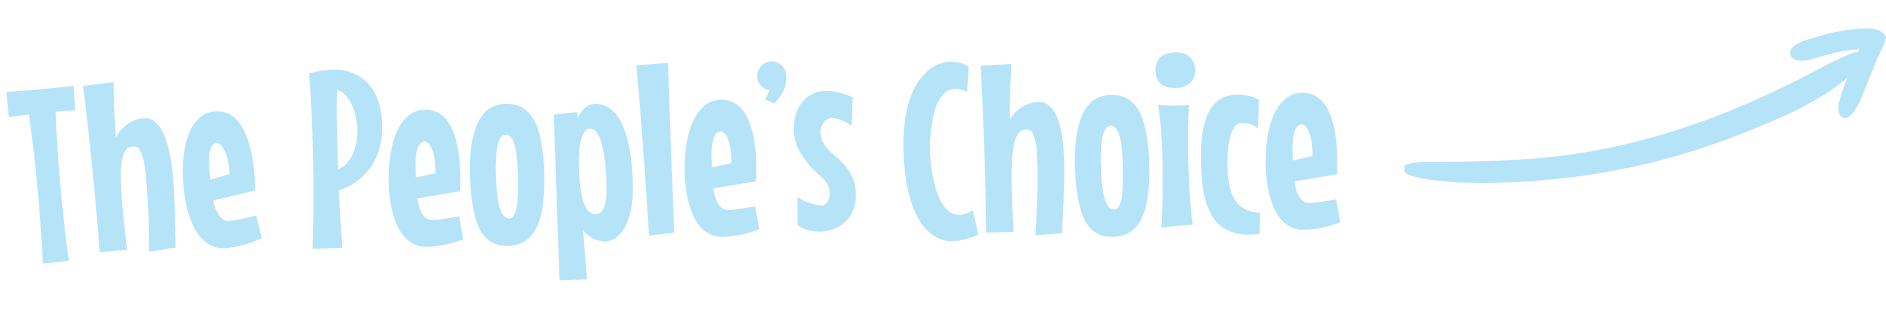 Text in light blue that reads "The People's Choice"